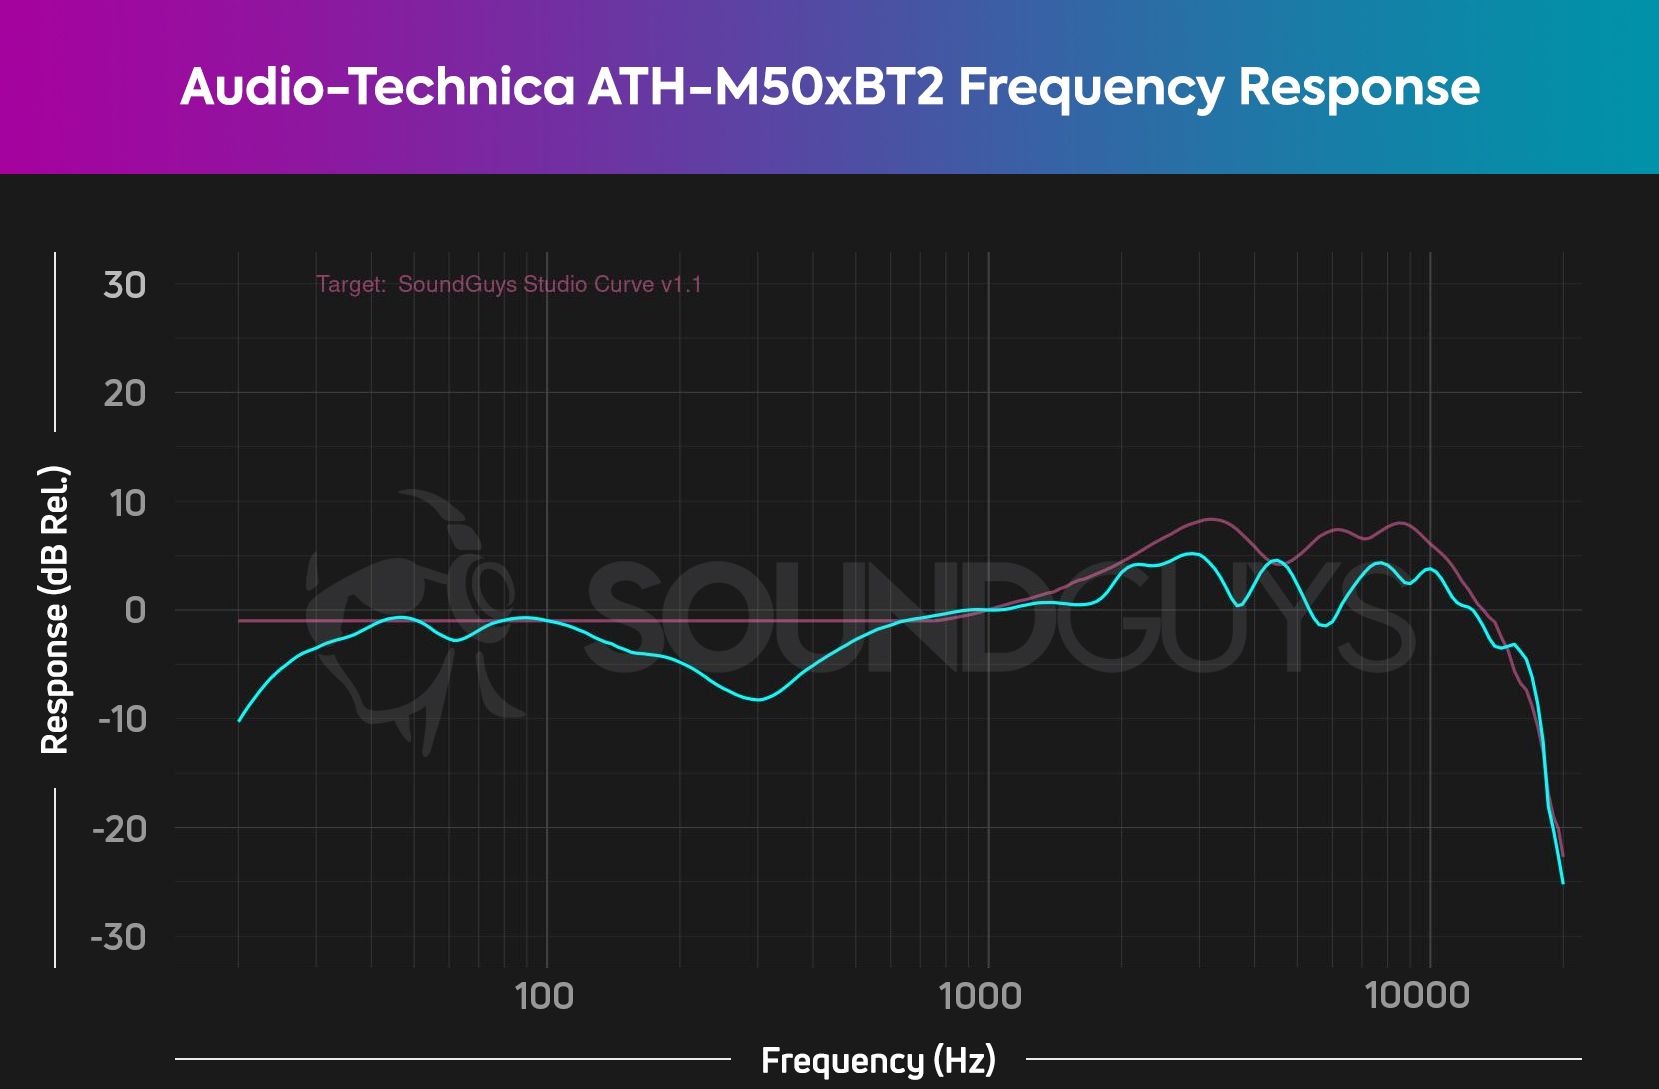 Frequency response of Audio-Technica ATH-M50xBT2 set against the ideal studio curve.